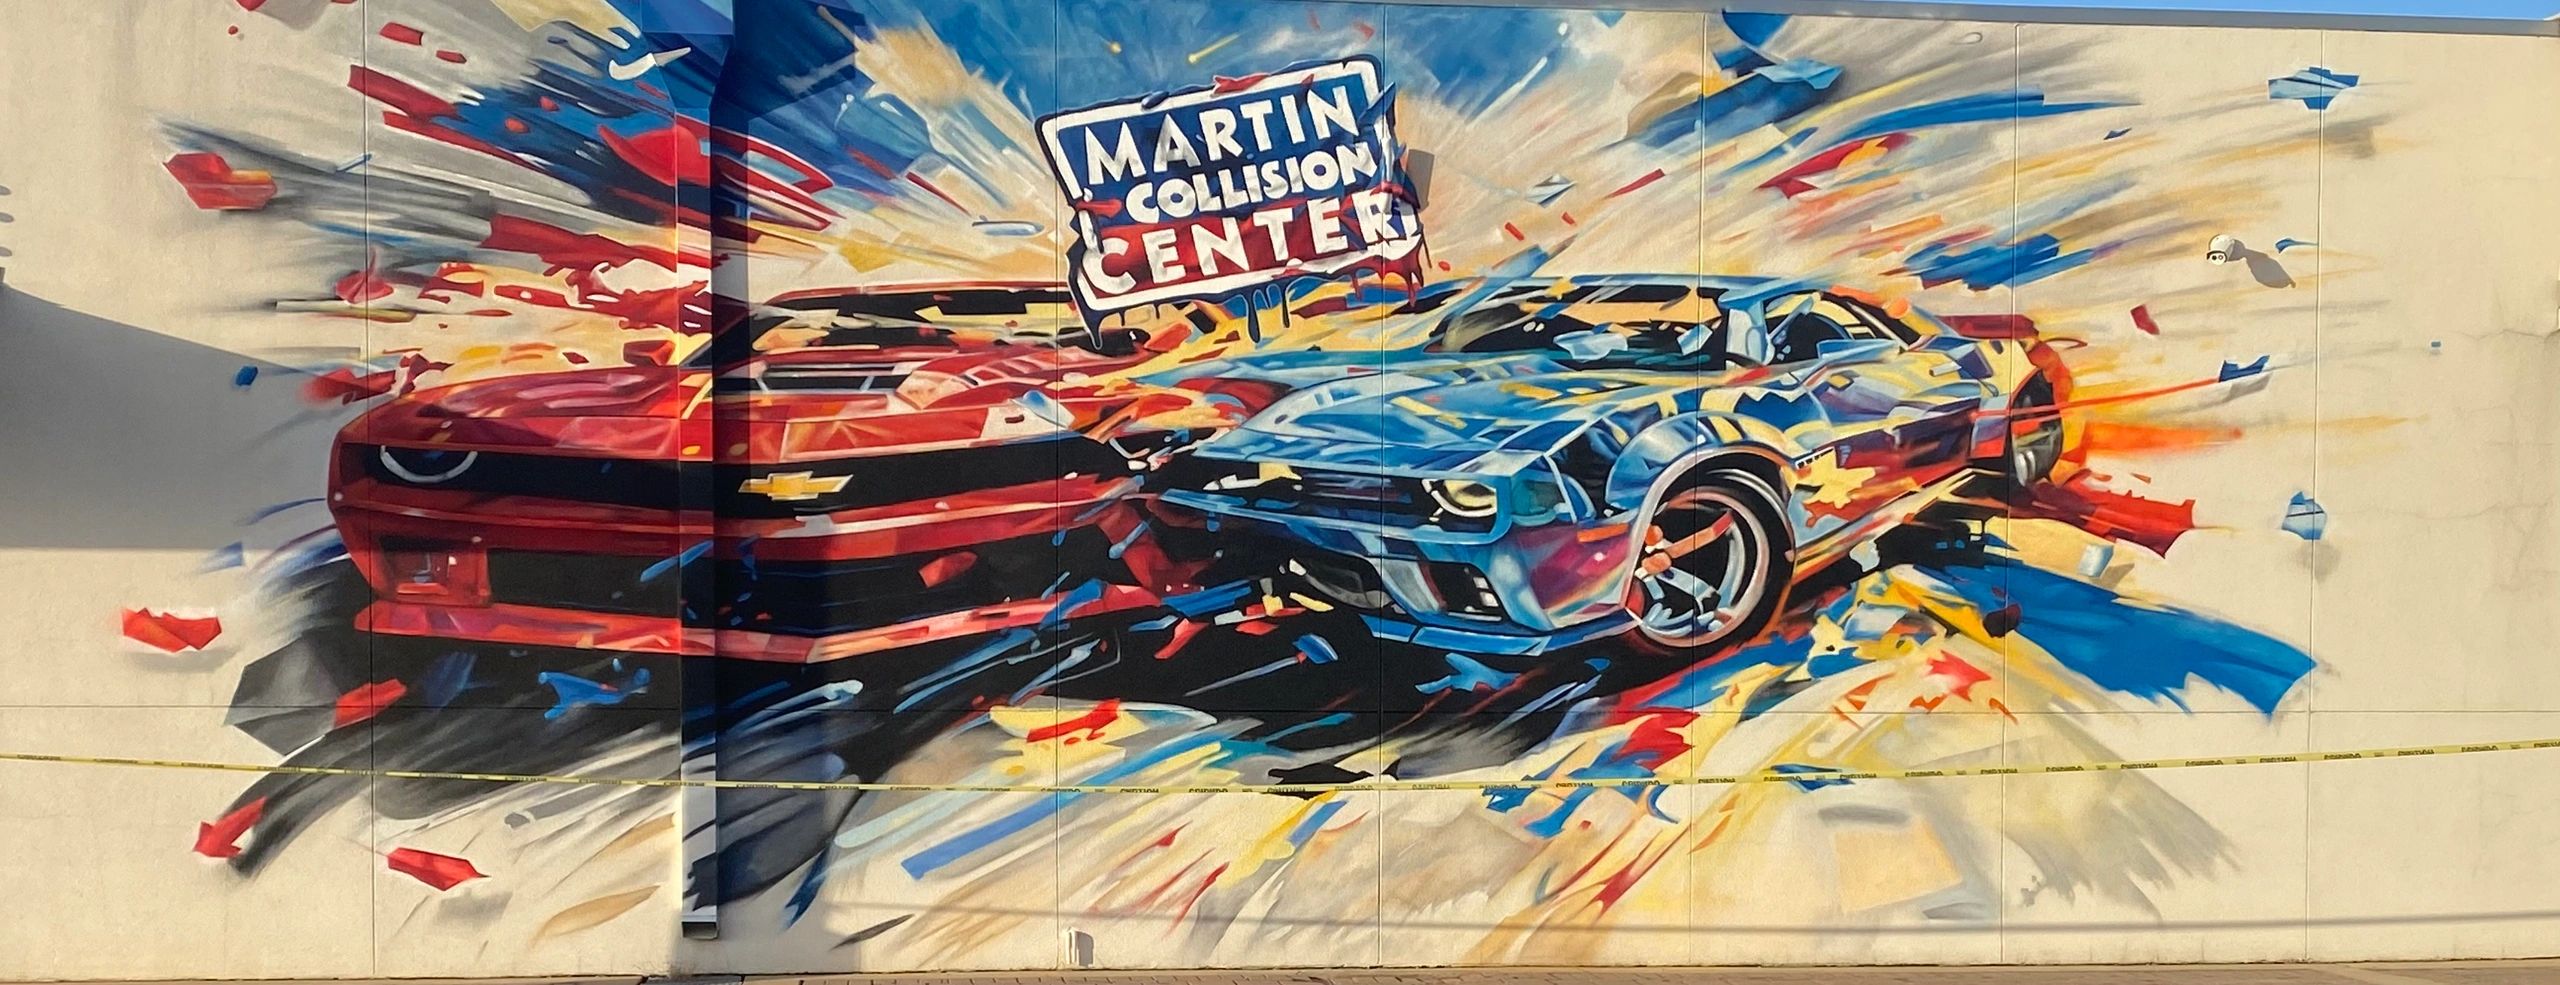 Martin Collision Center - Body Shop Mural. Come by and check it out in person. 